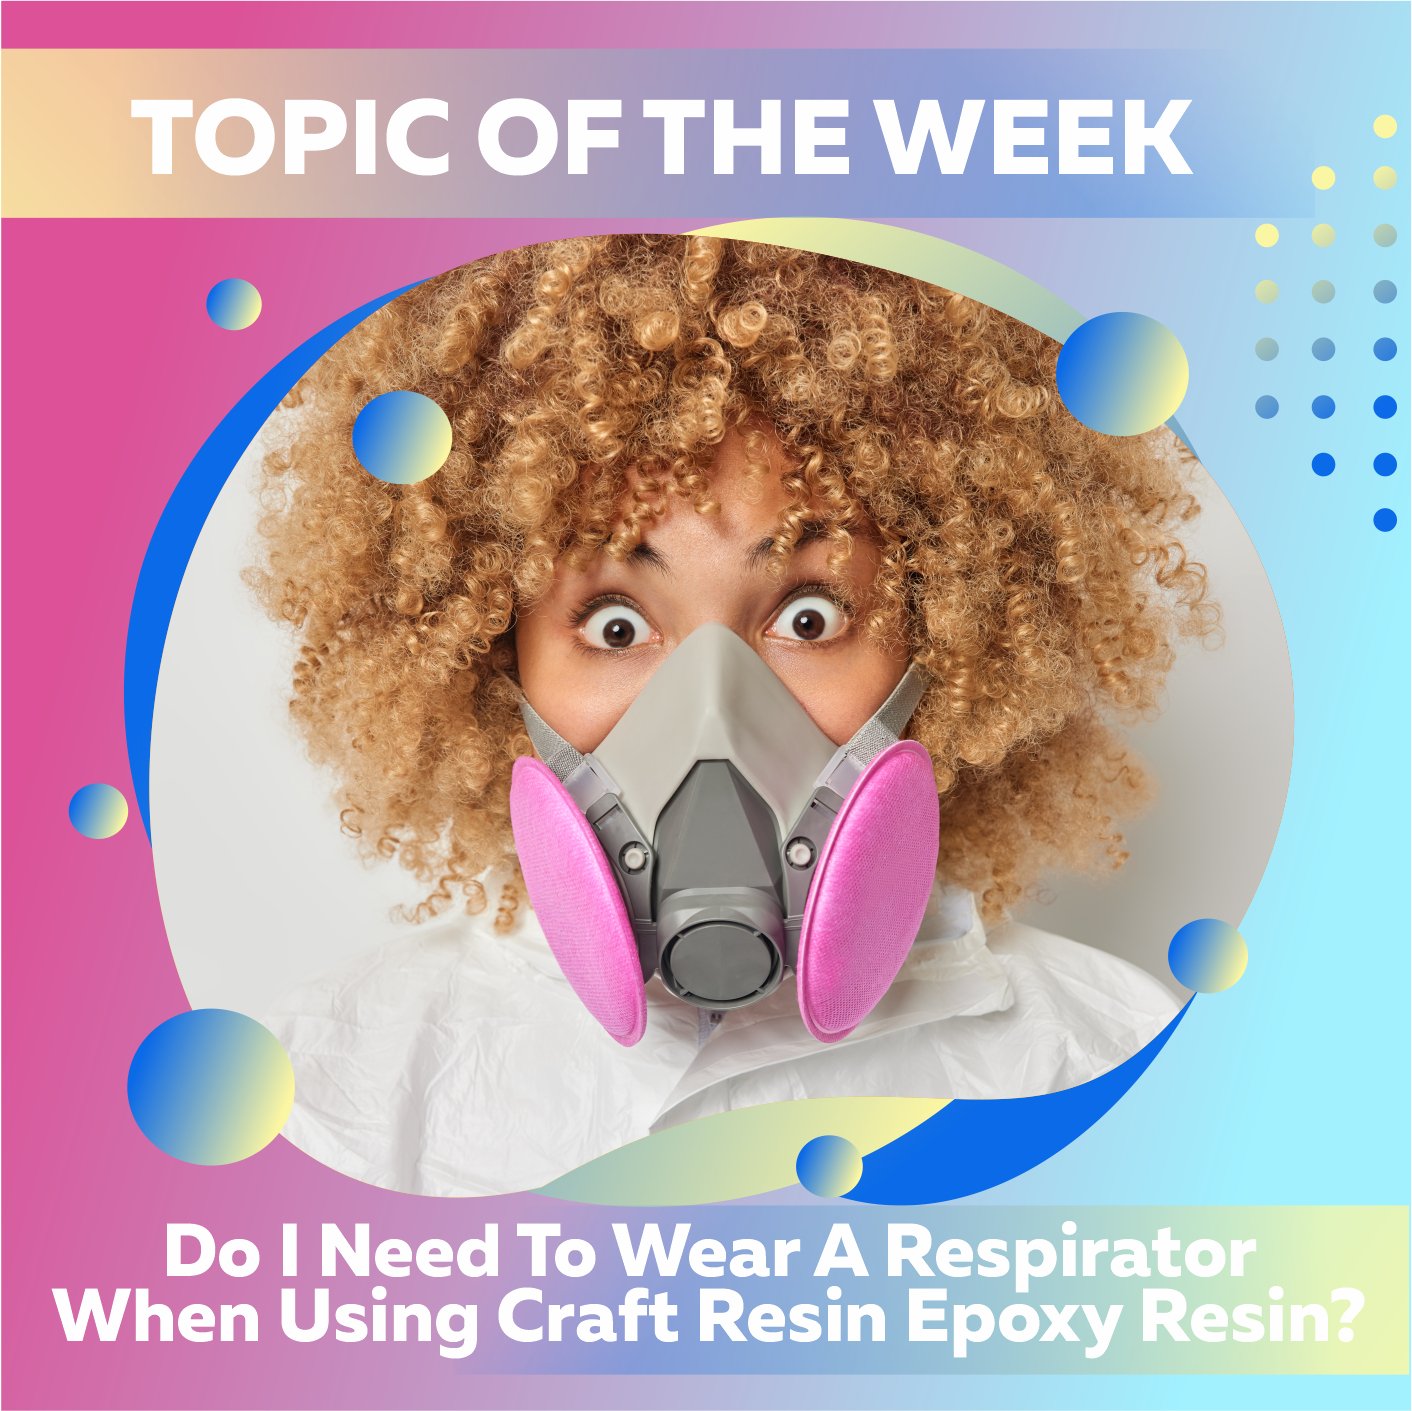 Do I Need To Wear A Respirator When Using Craft Resin Epoxy Resin? - Craft Resin